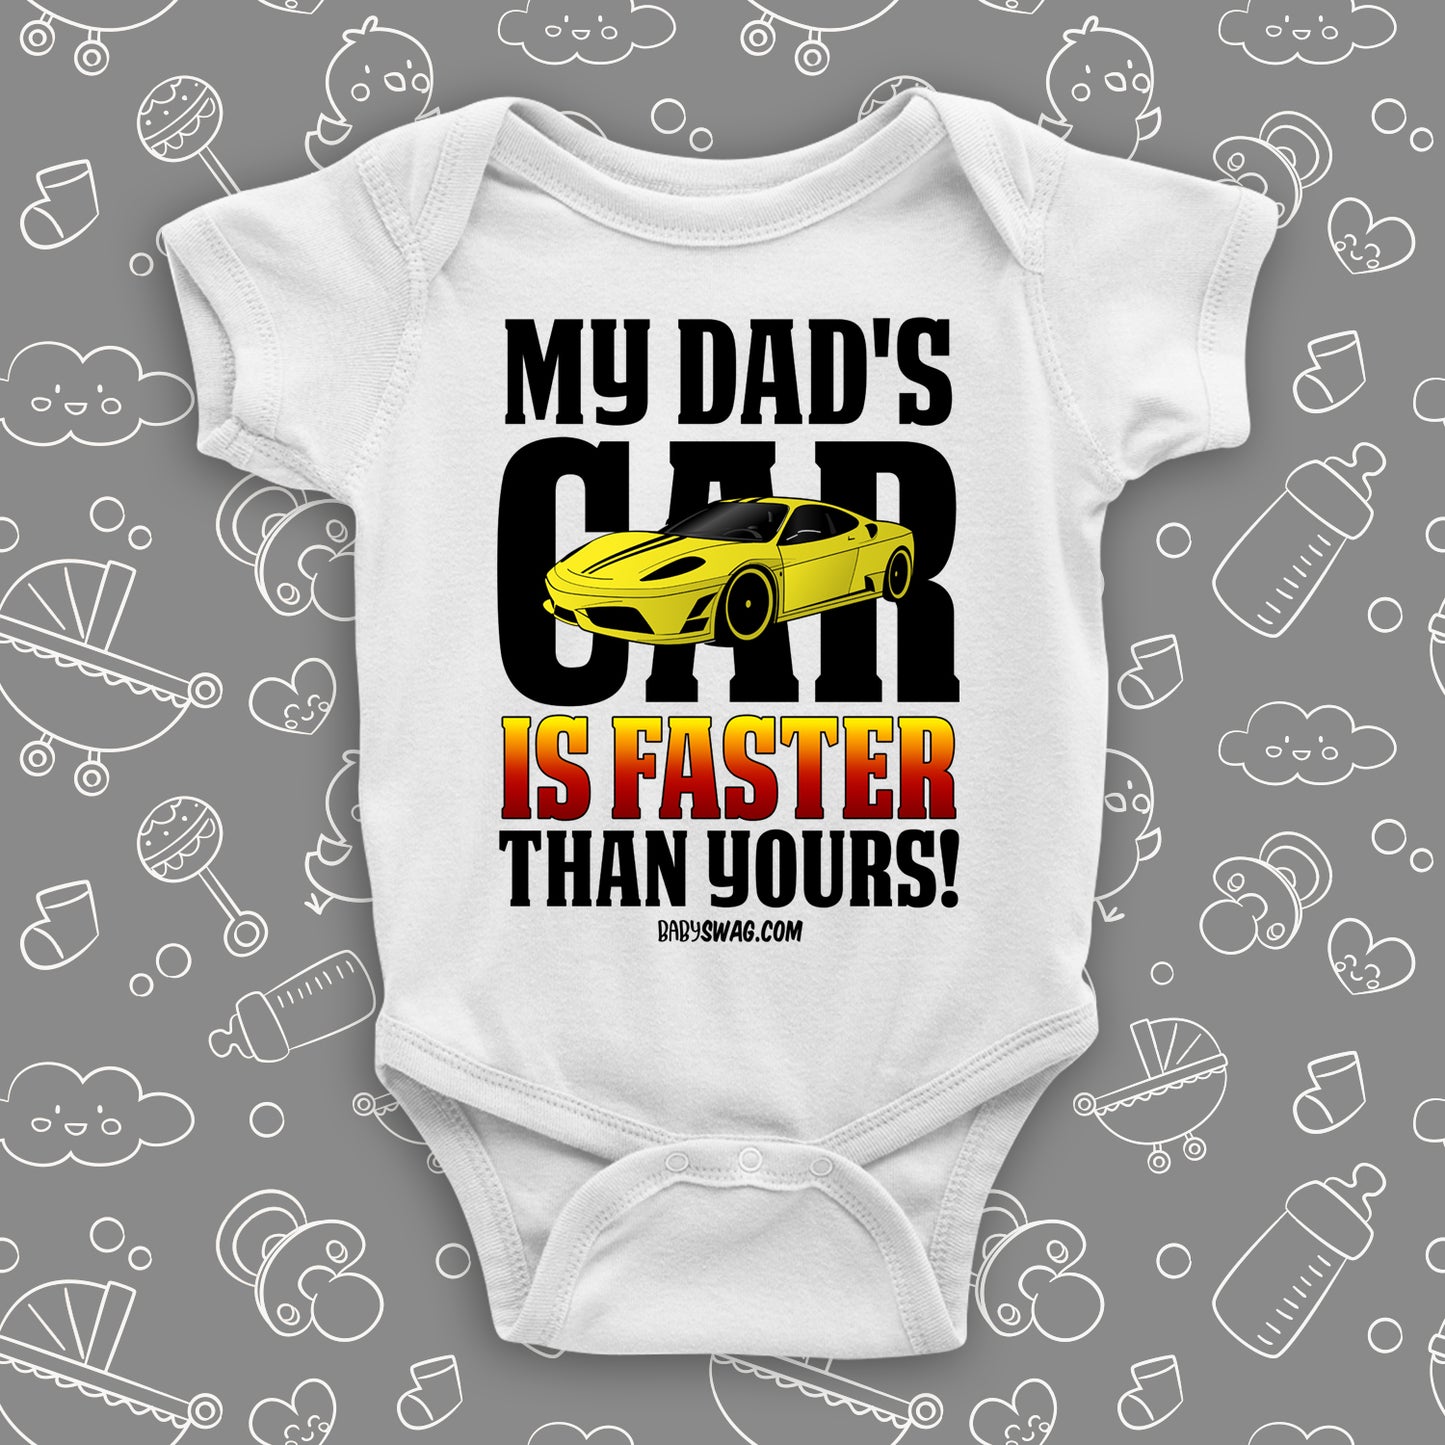 A white cute baby boy onesie with saying "My Dad's Car Is Faster Than Yours!" and an image of a yellow race car. 